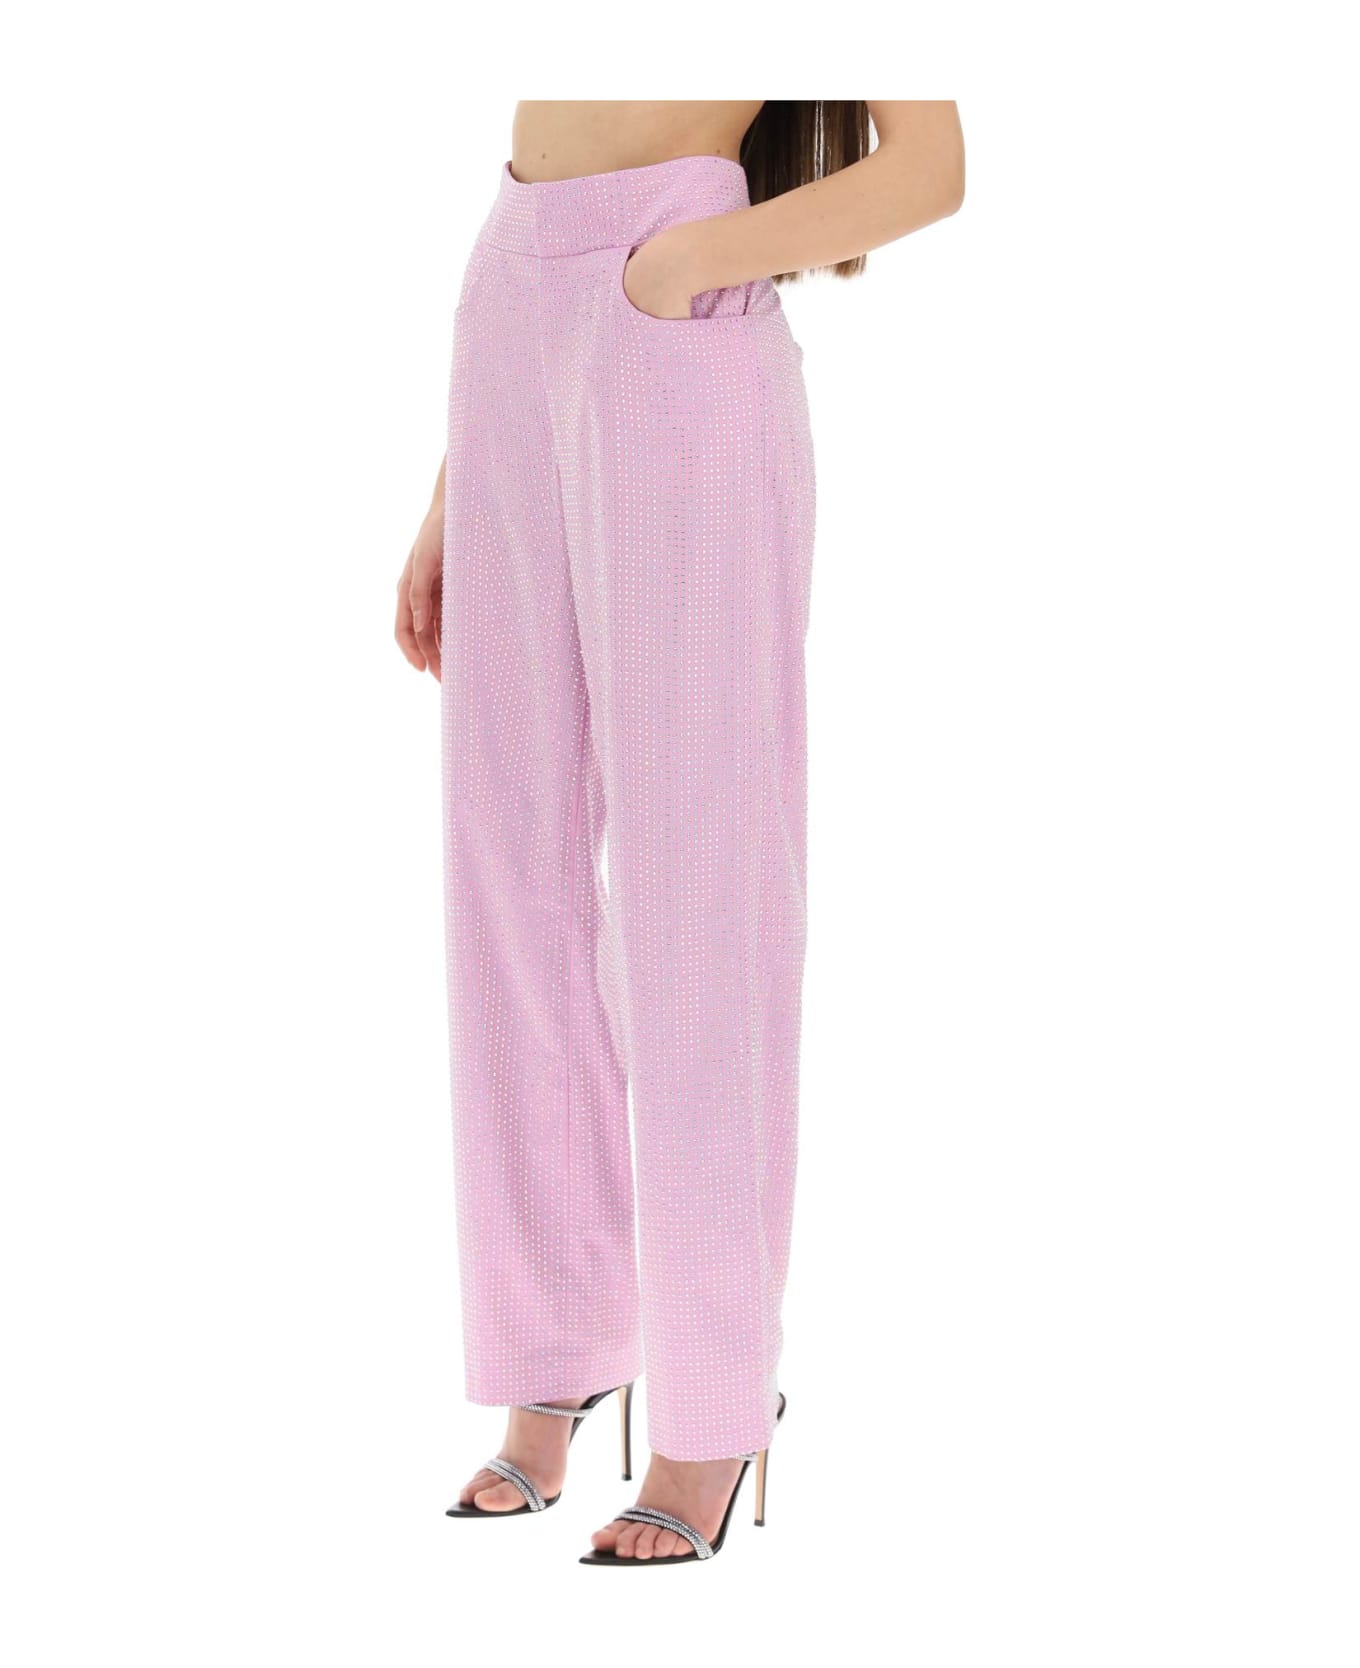 Giuseppe di Morabito Wide-leg Pants With Crystals - LILAC PINK (Pink)